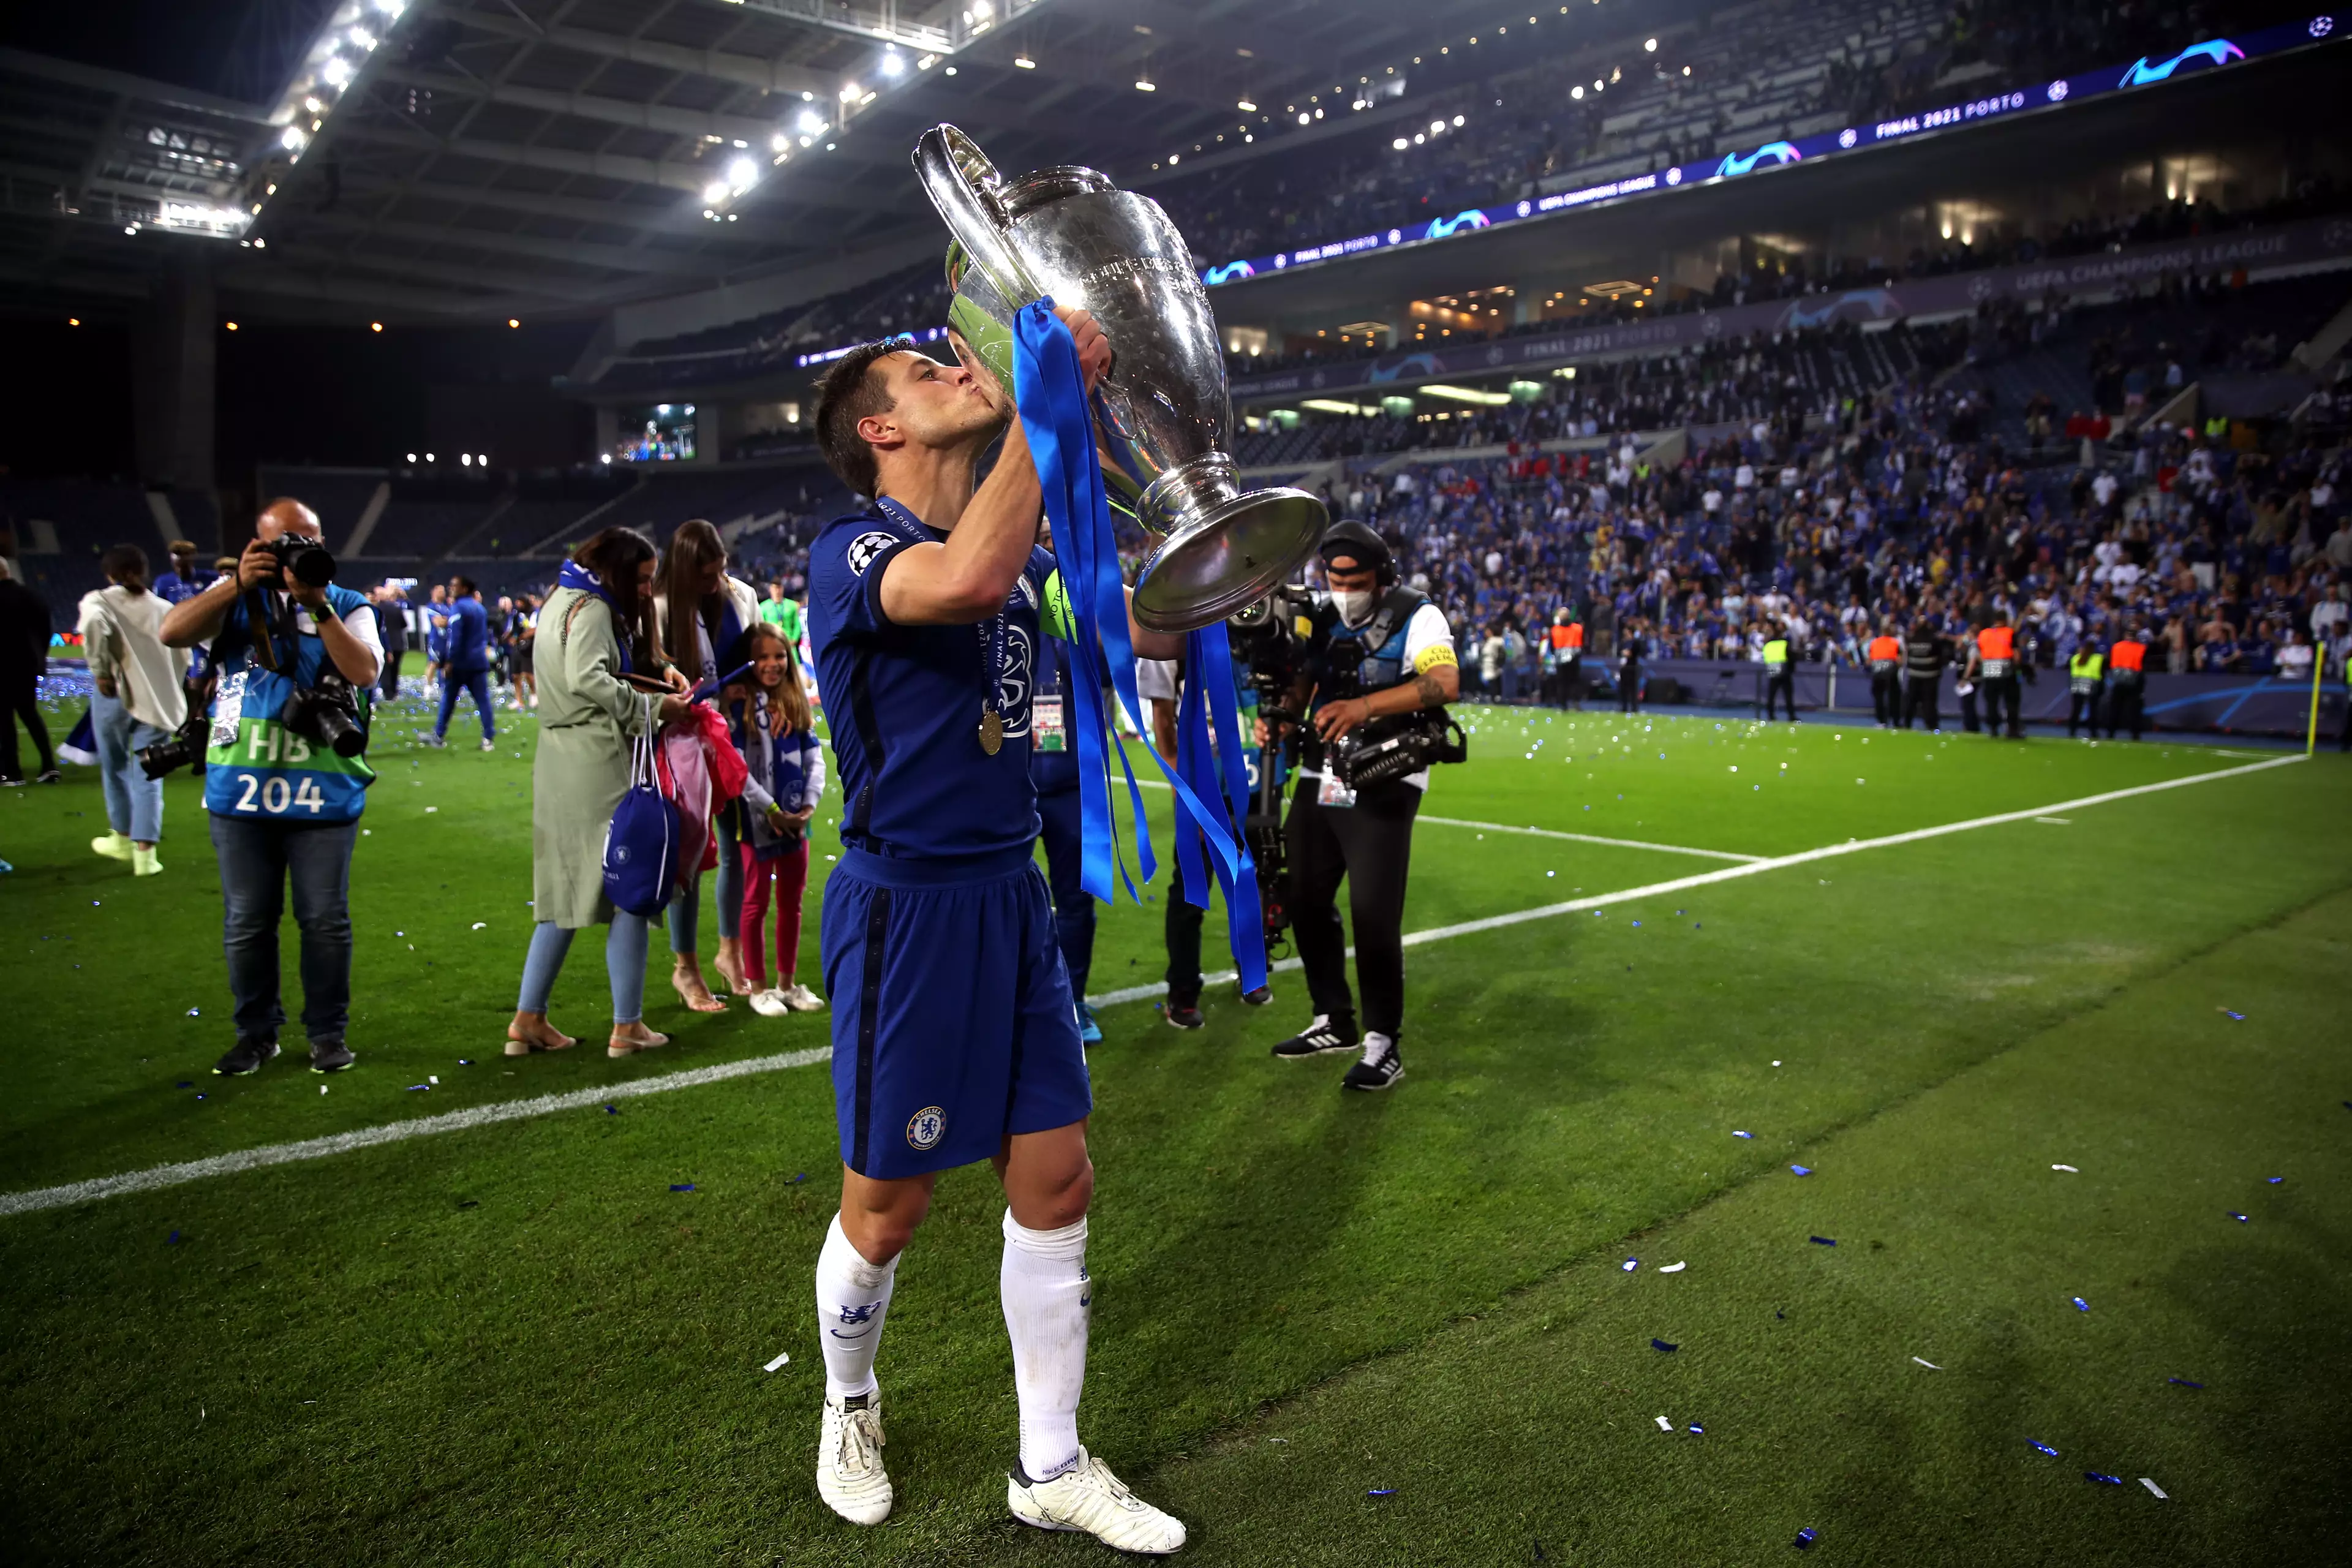 Chelsea fans will get a glimpse of the trophy next week. Image: PA Images